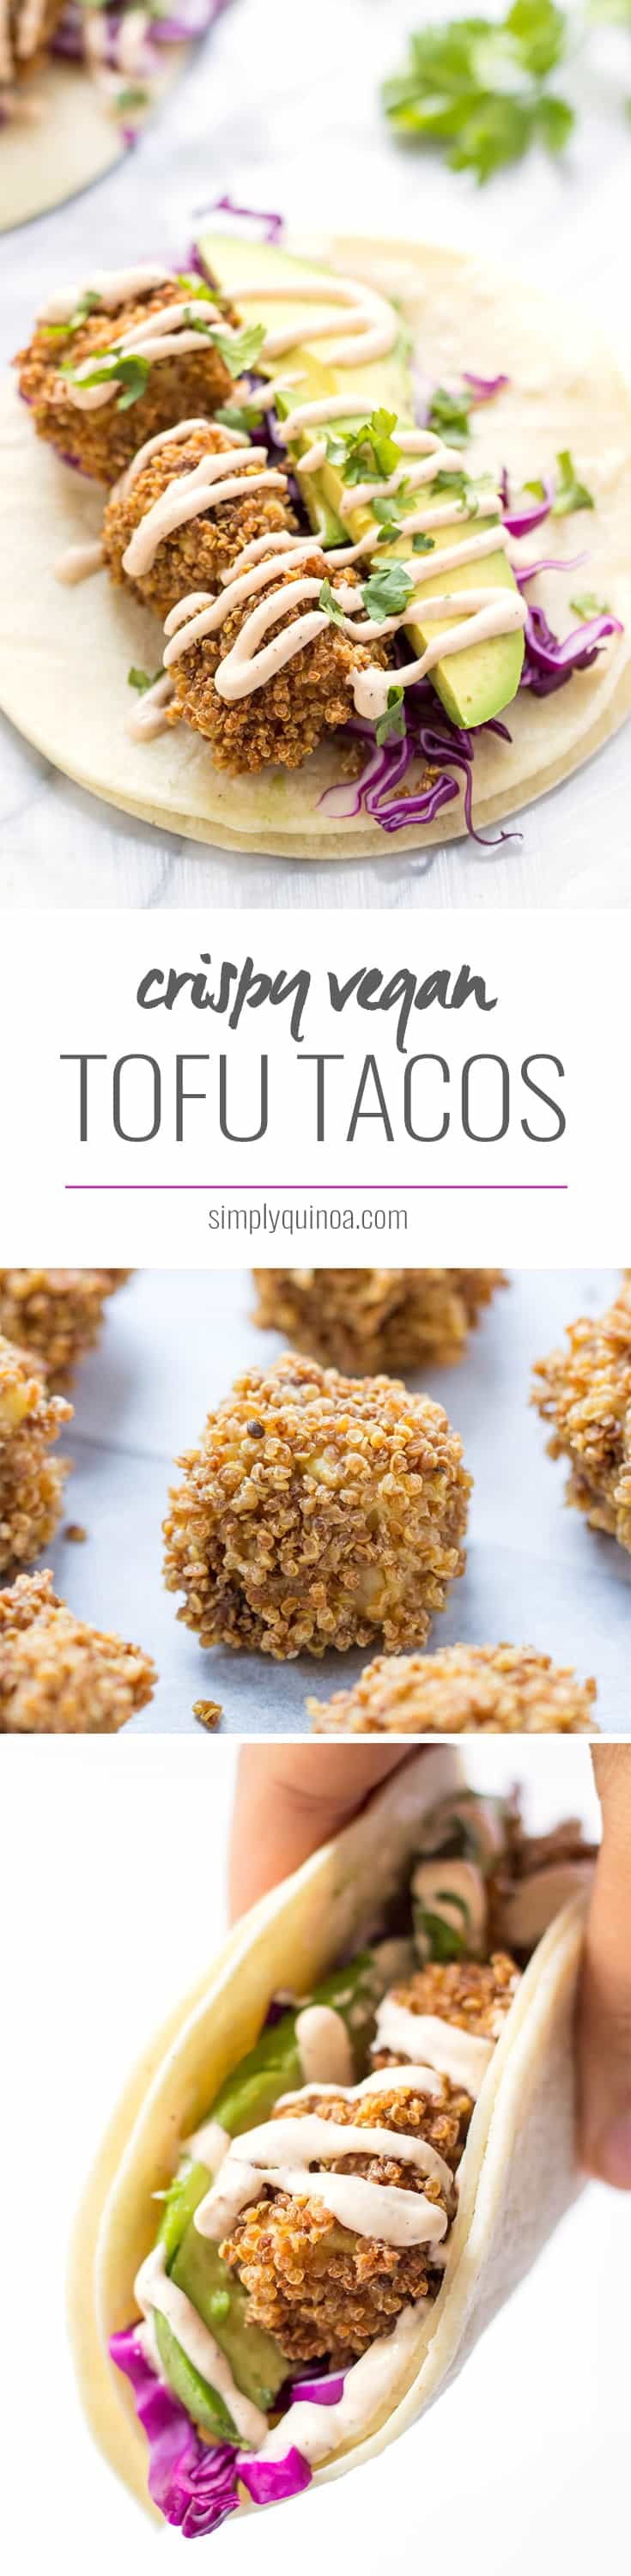 These crispy tofu tacos are AMAZING! not to mention they're actually healthy too - no frying, no gluten and no dairy! [VEGAN]